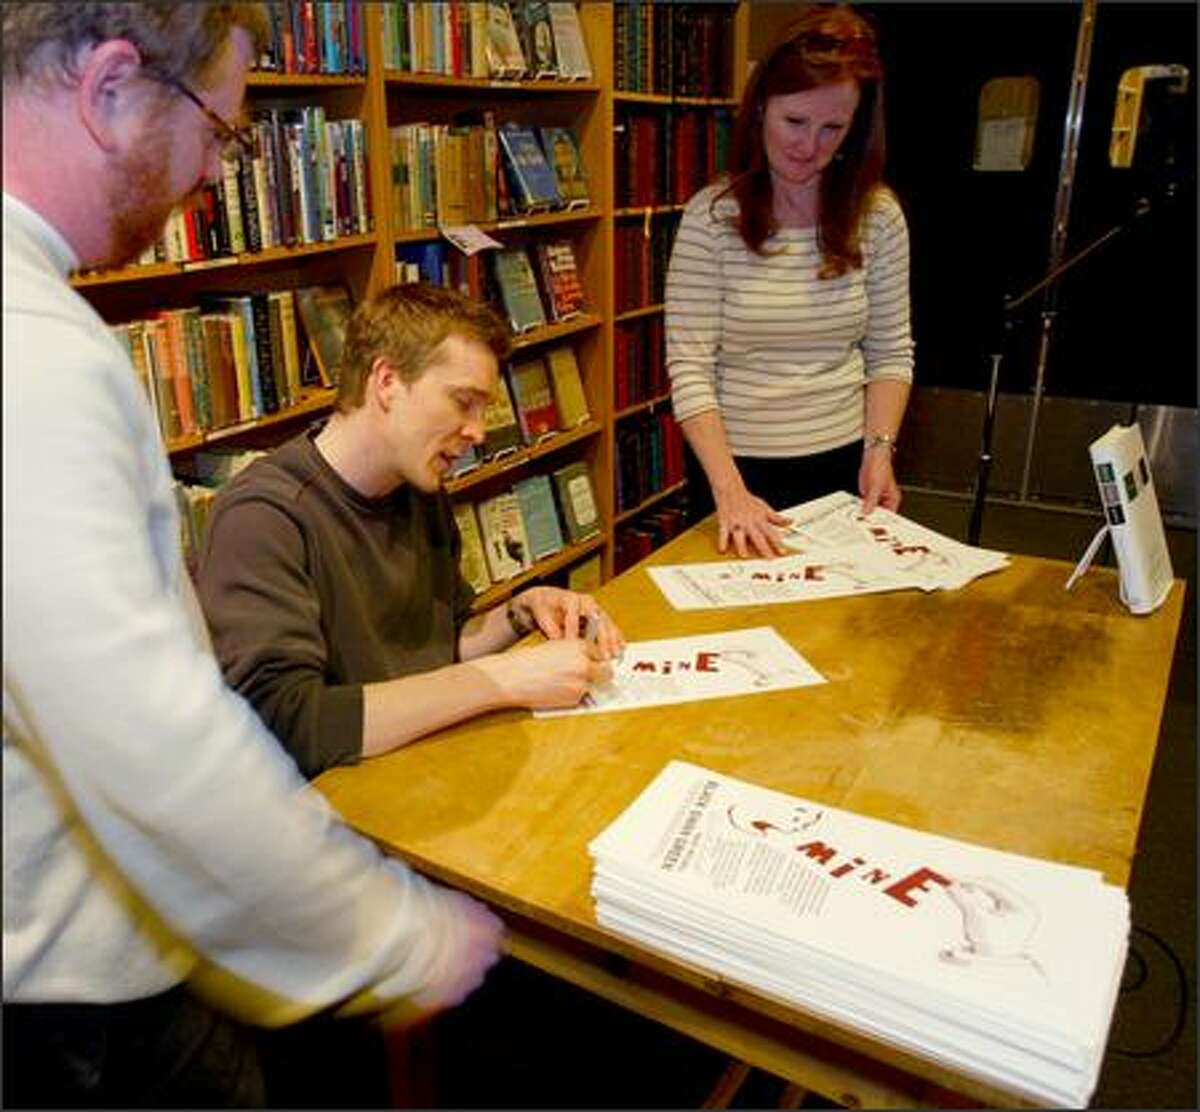 "Black Swan Green" author David Mitchell signs broadsides at Third Place Books April 26. With him are store managing partner Robert Sindelar, left, who had the idea for the broadsides, and Gail DiRe, the author's escort.